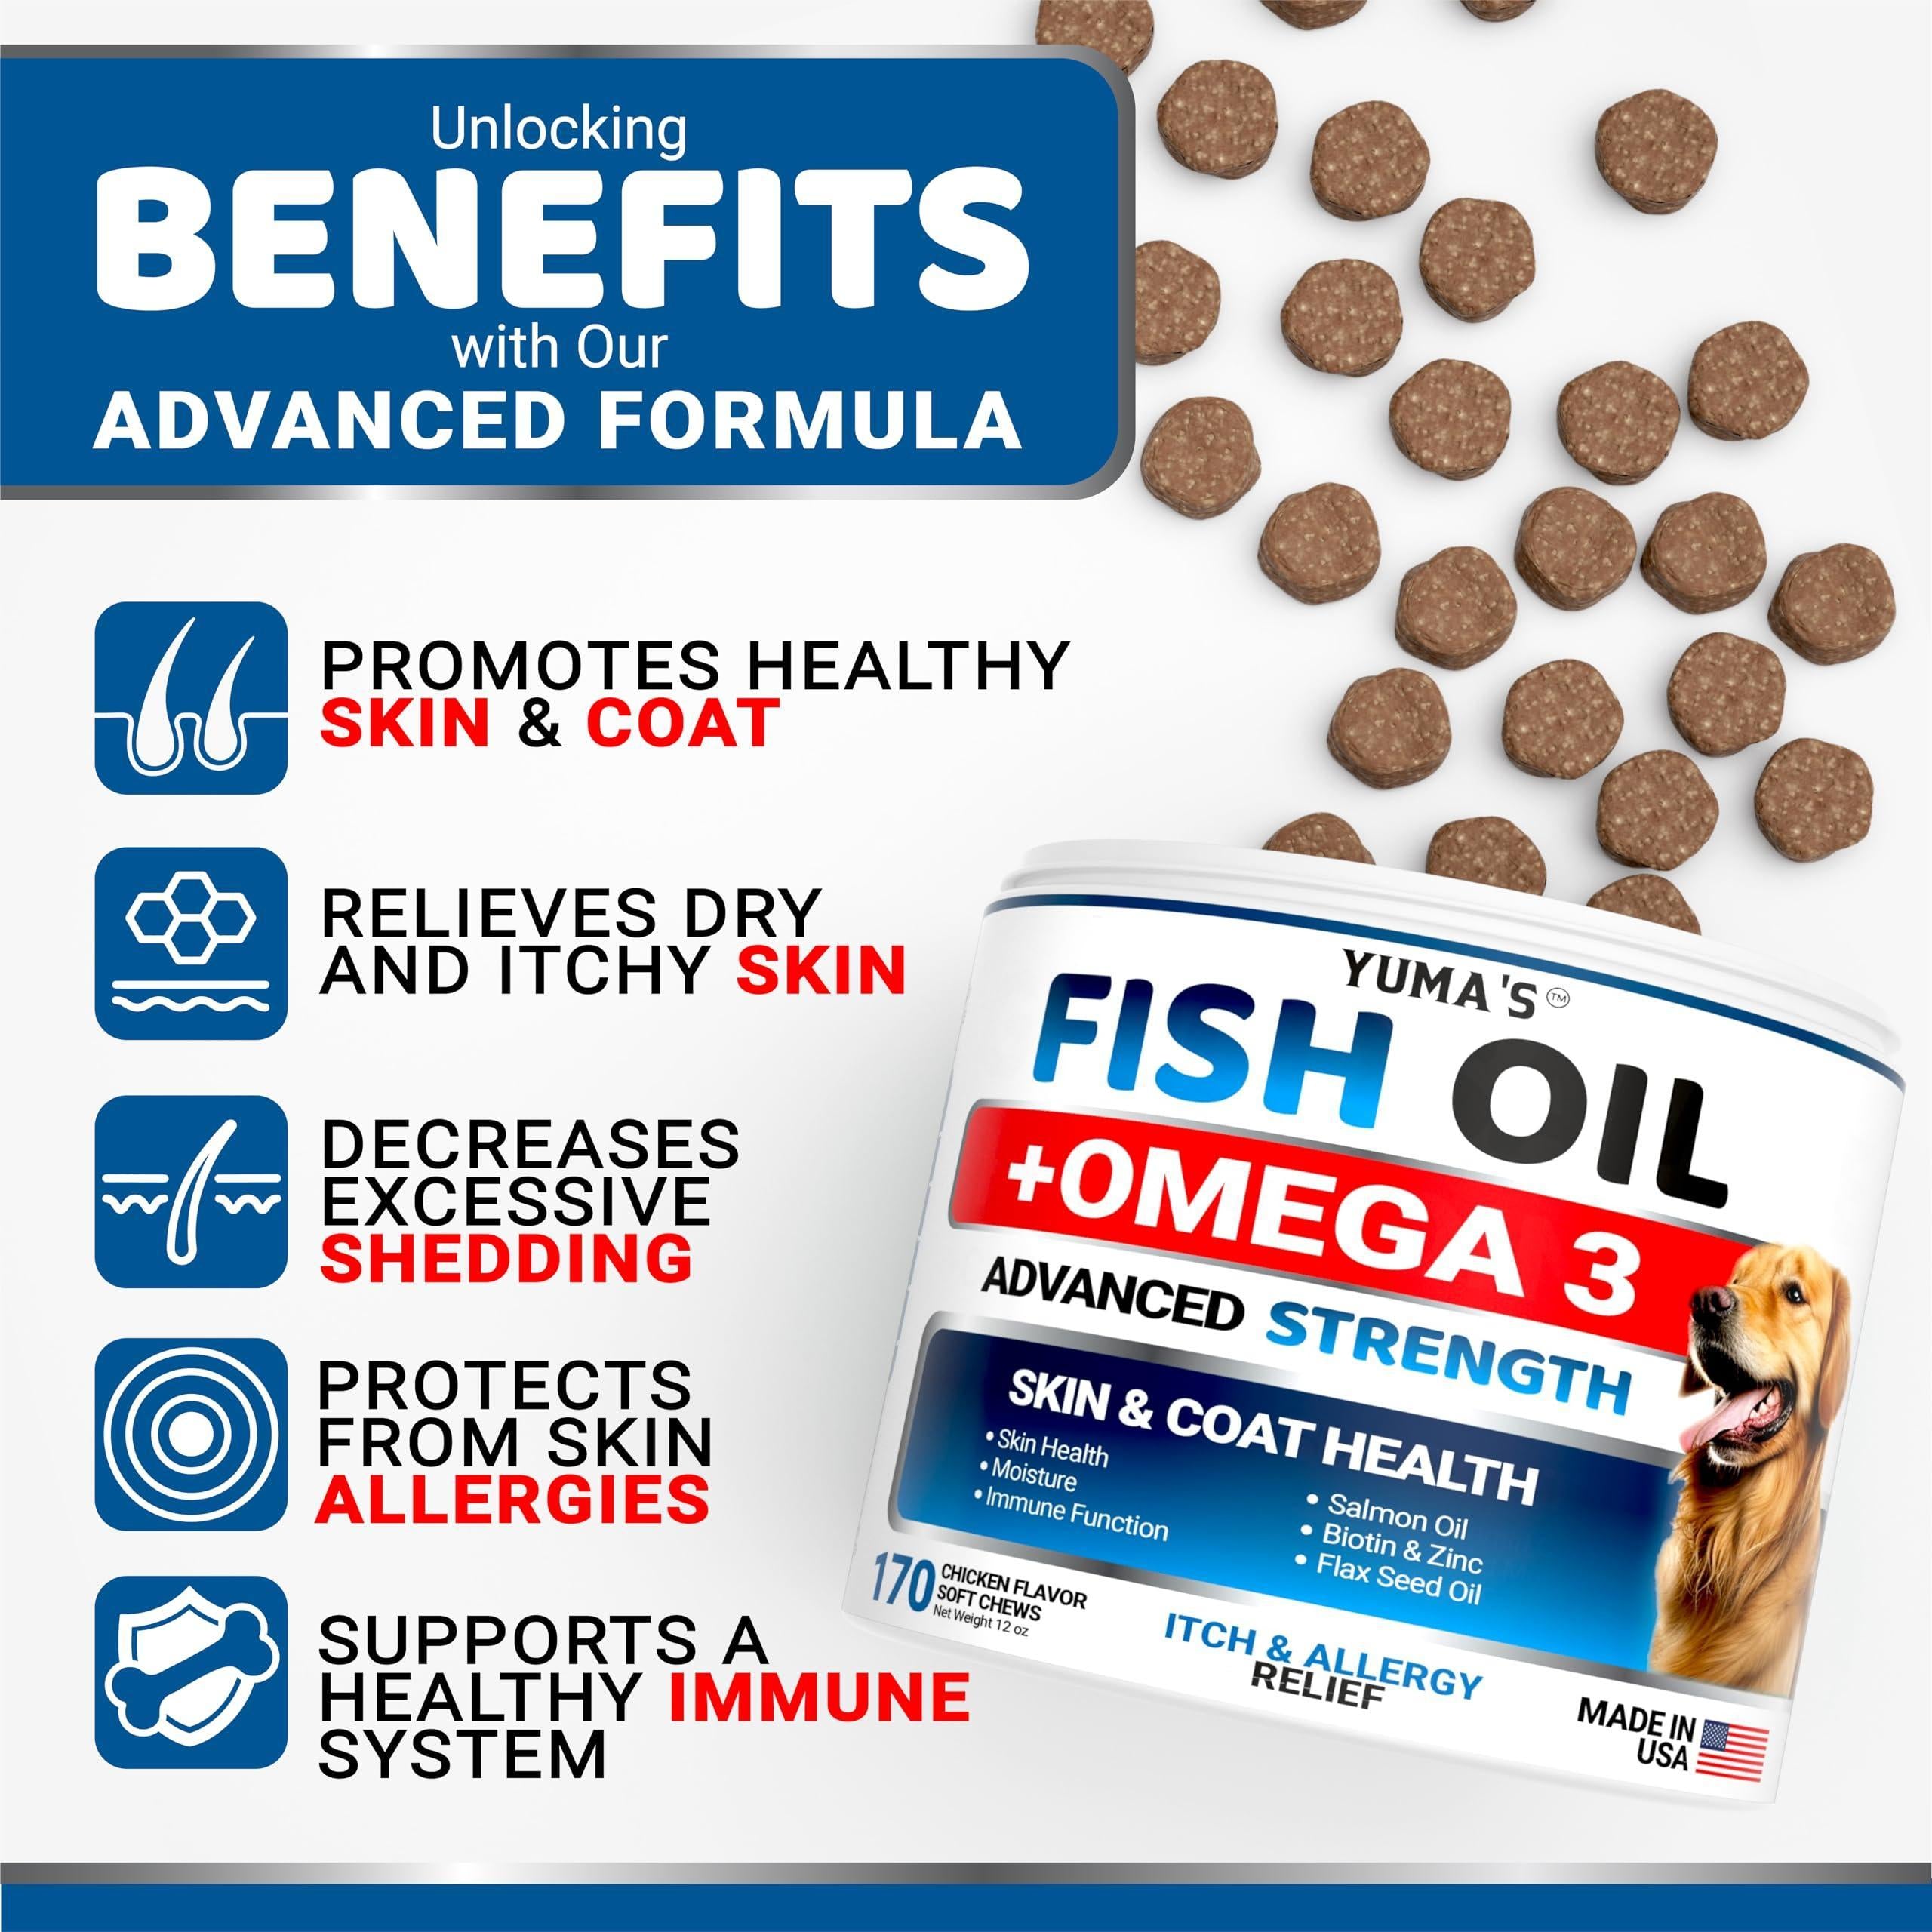 Omega 3 Fish Oil for Dogs   170 Chews   Skin and Coat Supplement   Omega 3 for Dogs   Dry & Itchy Skin Relief Treatment   Allergy Support   Dog Anti Shedding Treats   Shiny Coats   EPA & DHA   Salmon